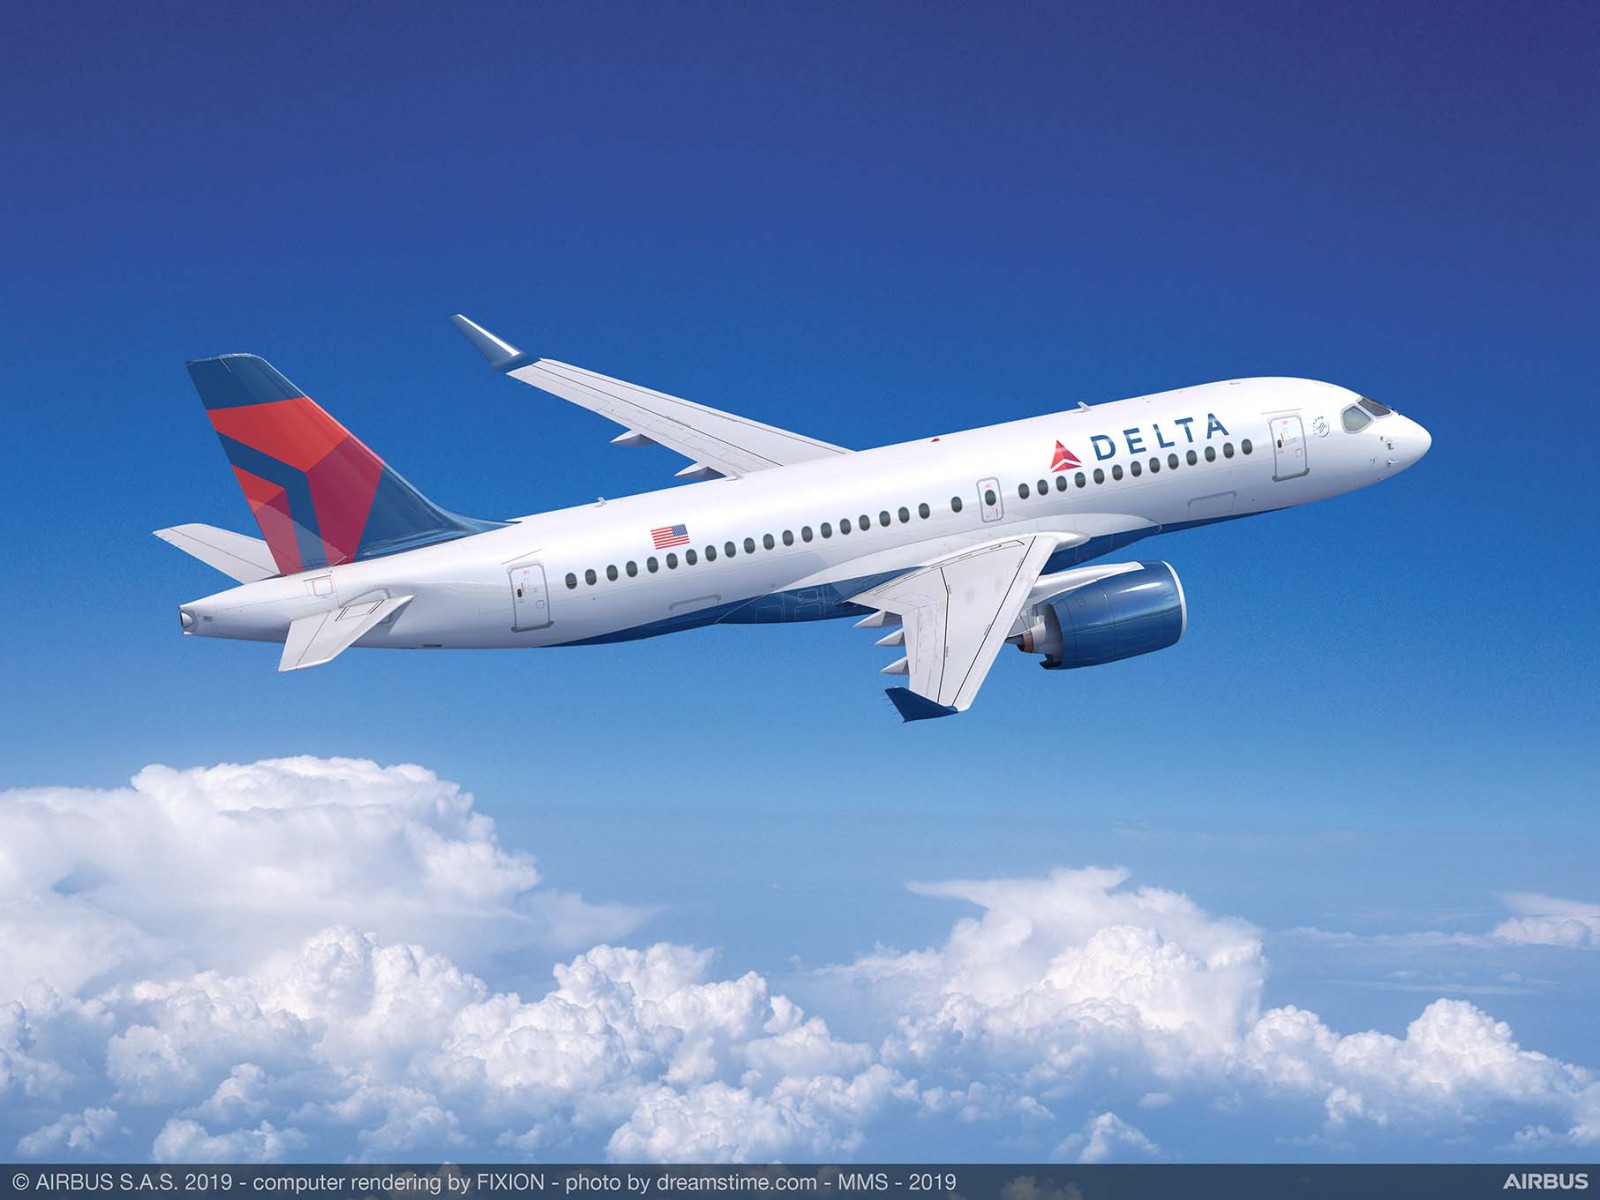 Delta gives its A220s extra legs and orders five more - Airline Ratings